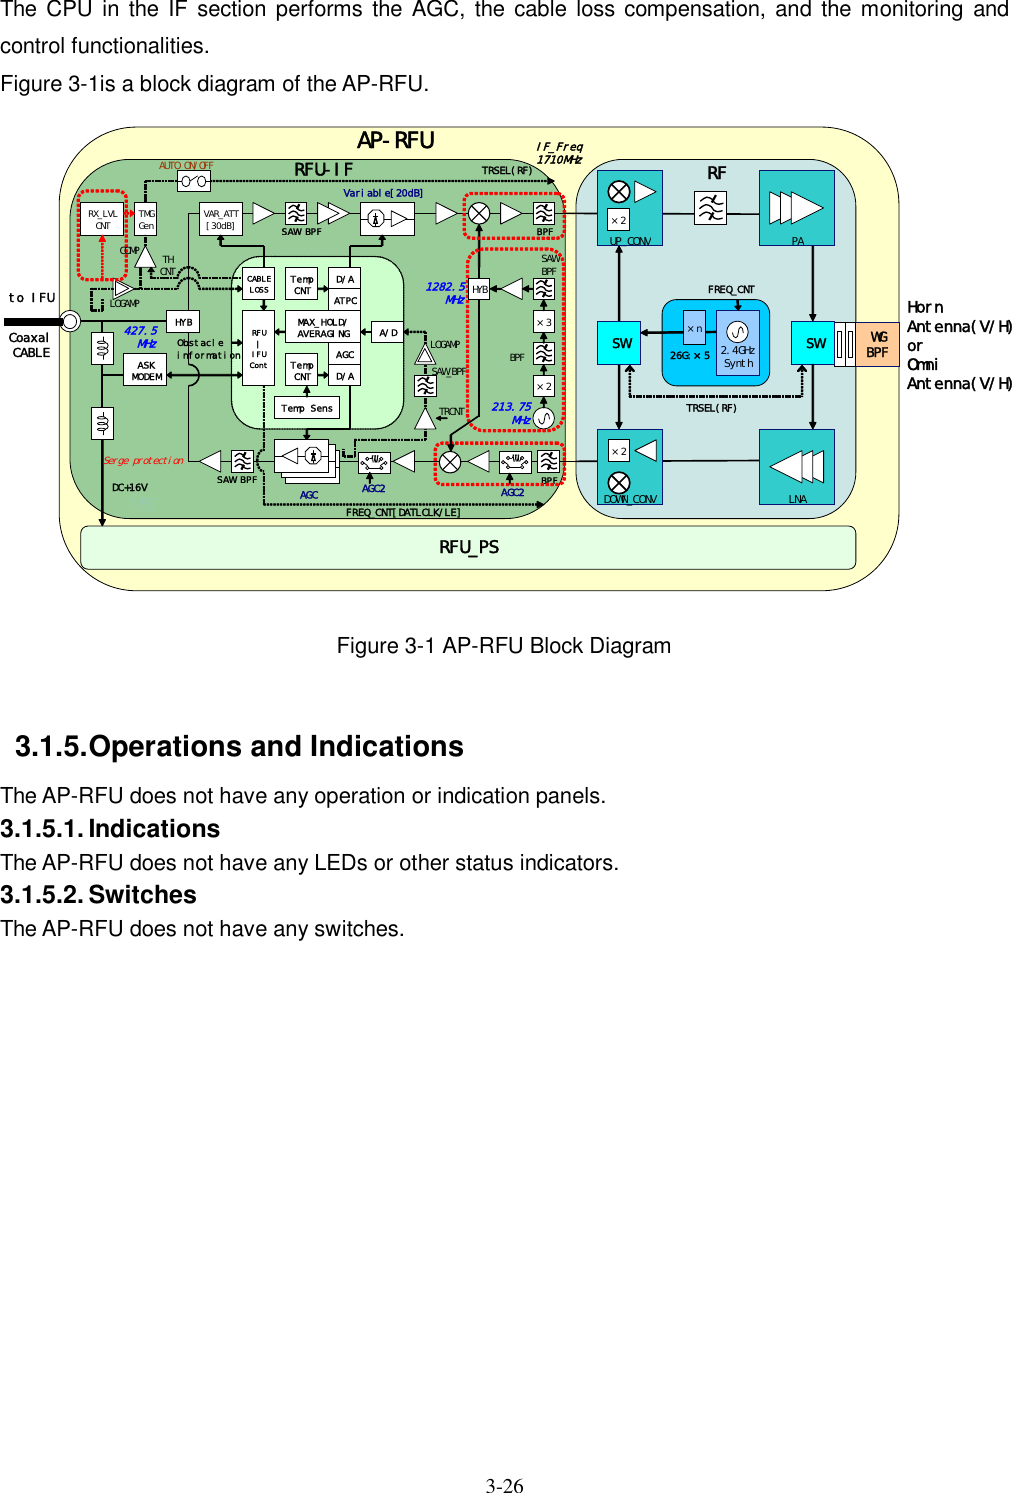  3-26   The  CPU  in the  IF  section performs  the AGC, the cable loss compensation, and the  monitoring and control functionalities. Figure 3-1is a block diagram of the AP-RFU. to IFUAP-RFUWGBPFRFSWLNASW2.4GHzSynth26G:×5×n×2DOWN_CONVTRSEL(RF)PA×2UP_CONVFREQ_CNTIF部HYBASKMODEMTempCNT D/AD/AAGC×21282.5MHzATPCAGC213.75MHzMAX_HOLD/AVERAGING A/DTRCNTVariable[20dB]TempCNTRFU¦IFUContTemp SensVAR_ATT[30dB]CABLELOSSDC+16VLOGAMPTMGGenTHCNTObstacleinformationTRSEL(RF)FREQ_CNT[DATLCLK/LE]427.5MHzSAW_BPFIF_Freq1710MHzSAW_BPFHornAntenna(V/H)orOmniAntenna(V/H)×3BPFSAWBPFBPFBPFLOGAMPSAW_BPFAGC2RX_LVLCNTAUTO ON/OFFAGC2RFU-IFRFU_PSSerge protectionCoaxalCABLEHYBCOMP Figure 3-1 AP-RFU Block Diagram    3.1.5. Operations and Indications The AP-RFU does not have any operation or indication panels. 3.1.5.1. Indications The AP-RFU does not have any LEDs or other status indicators. 3.1.5.2. Switches The AP-RFU does not have any switches. 